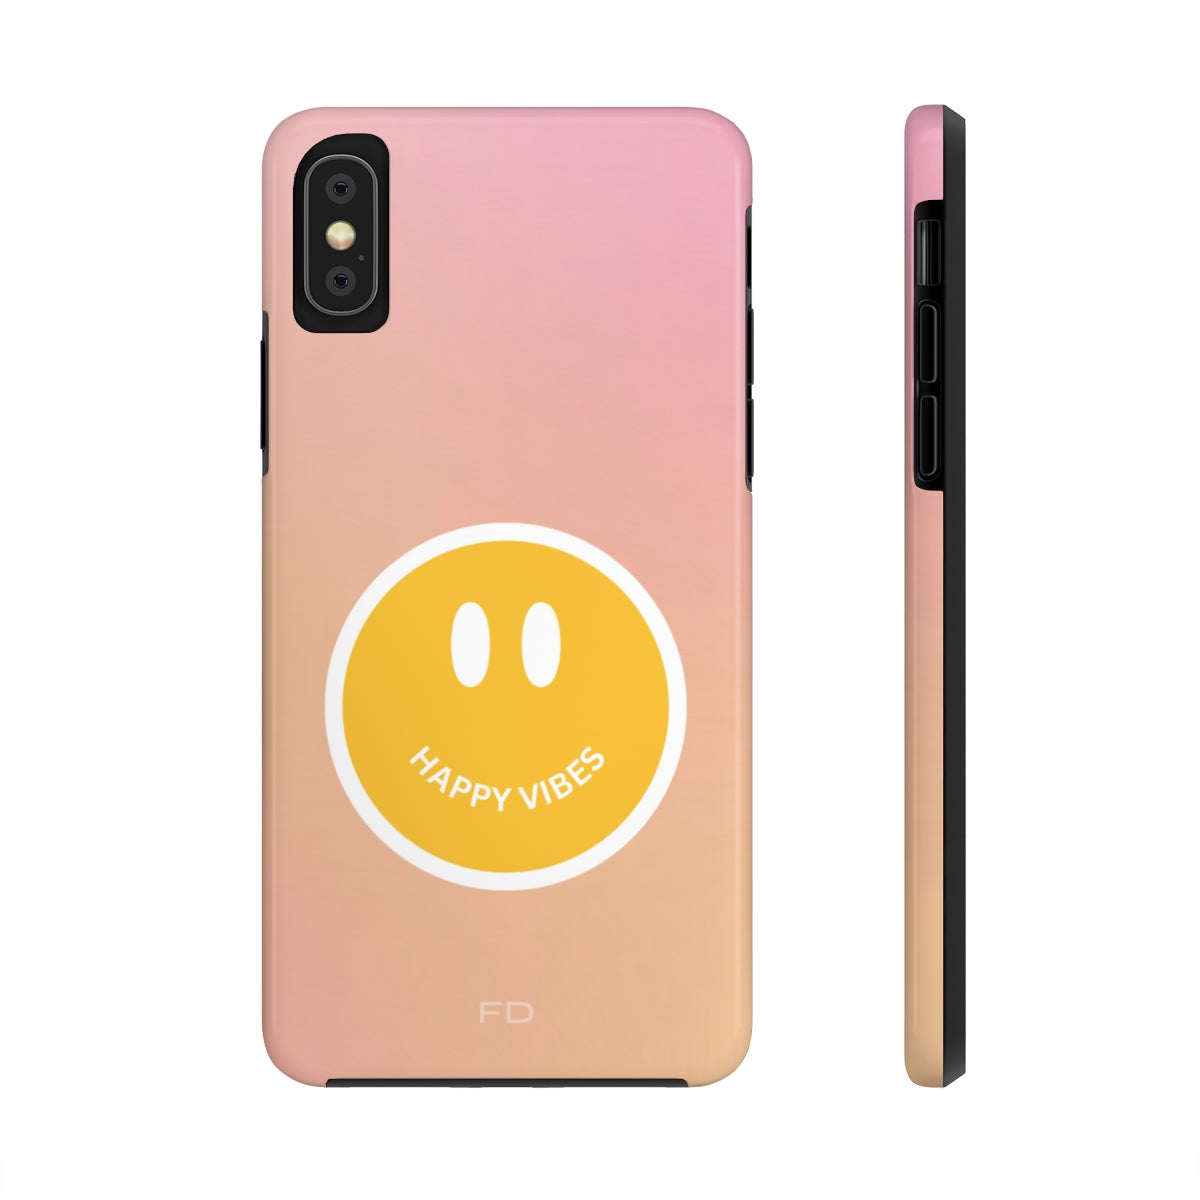 Happy Vibes Tough Case for iPhone with Wireless Charging